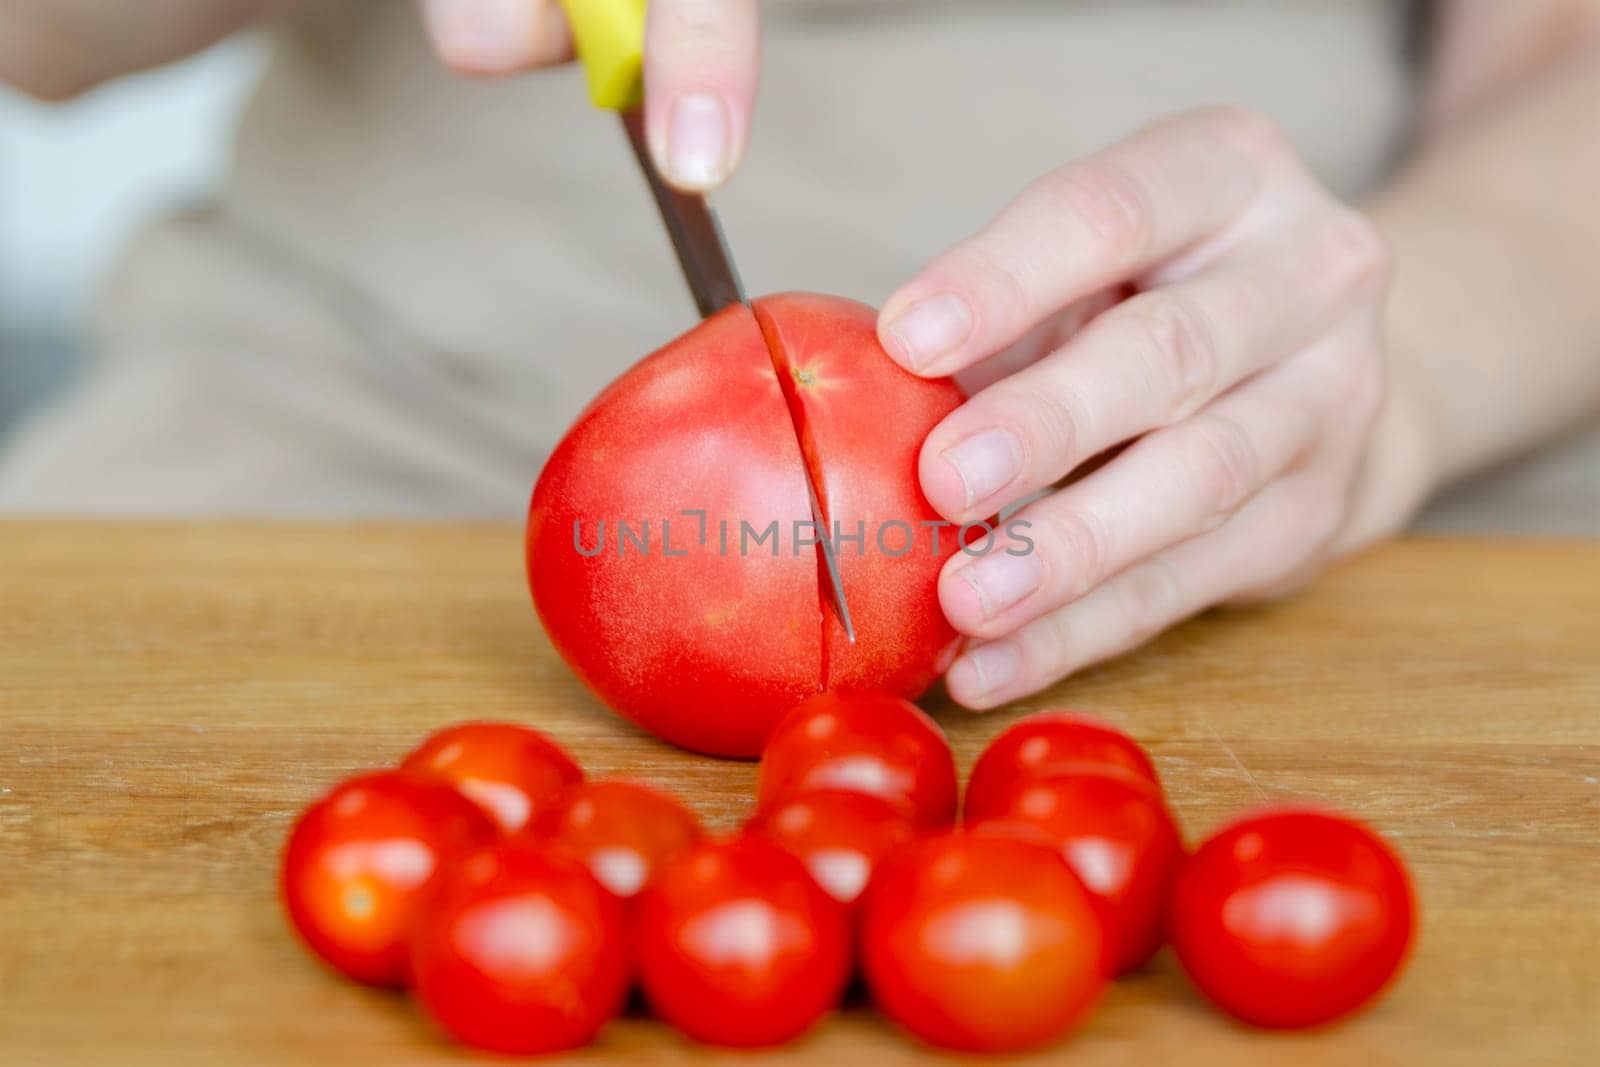 Preparing summer salad with tomatoes close-up. A woman's hands cut a tomato in half for a salad or side dish. High quality photo